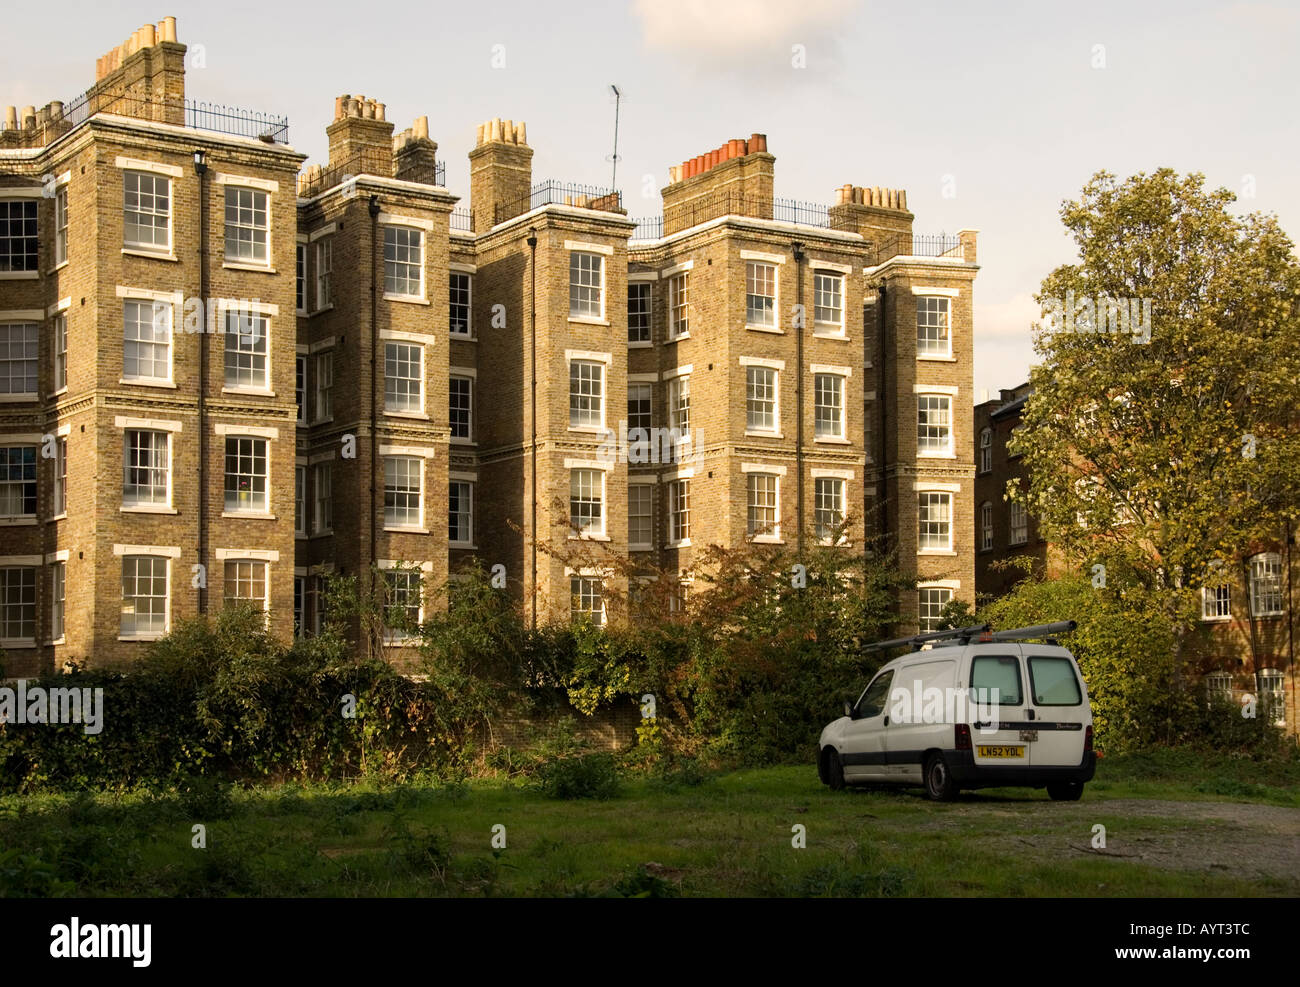 Grade II listed Tower Buildings (1864) and white panel van, Wapping, London, UK. Stock Photo